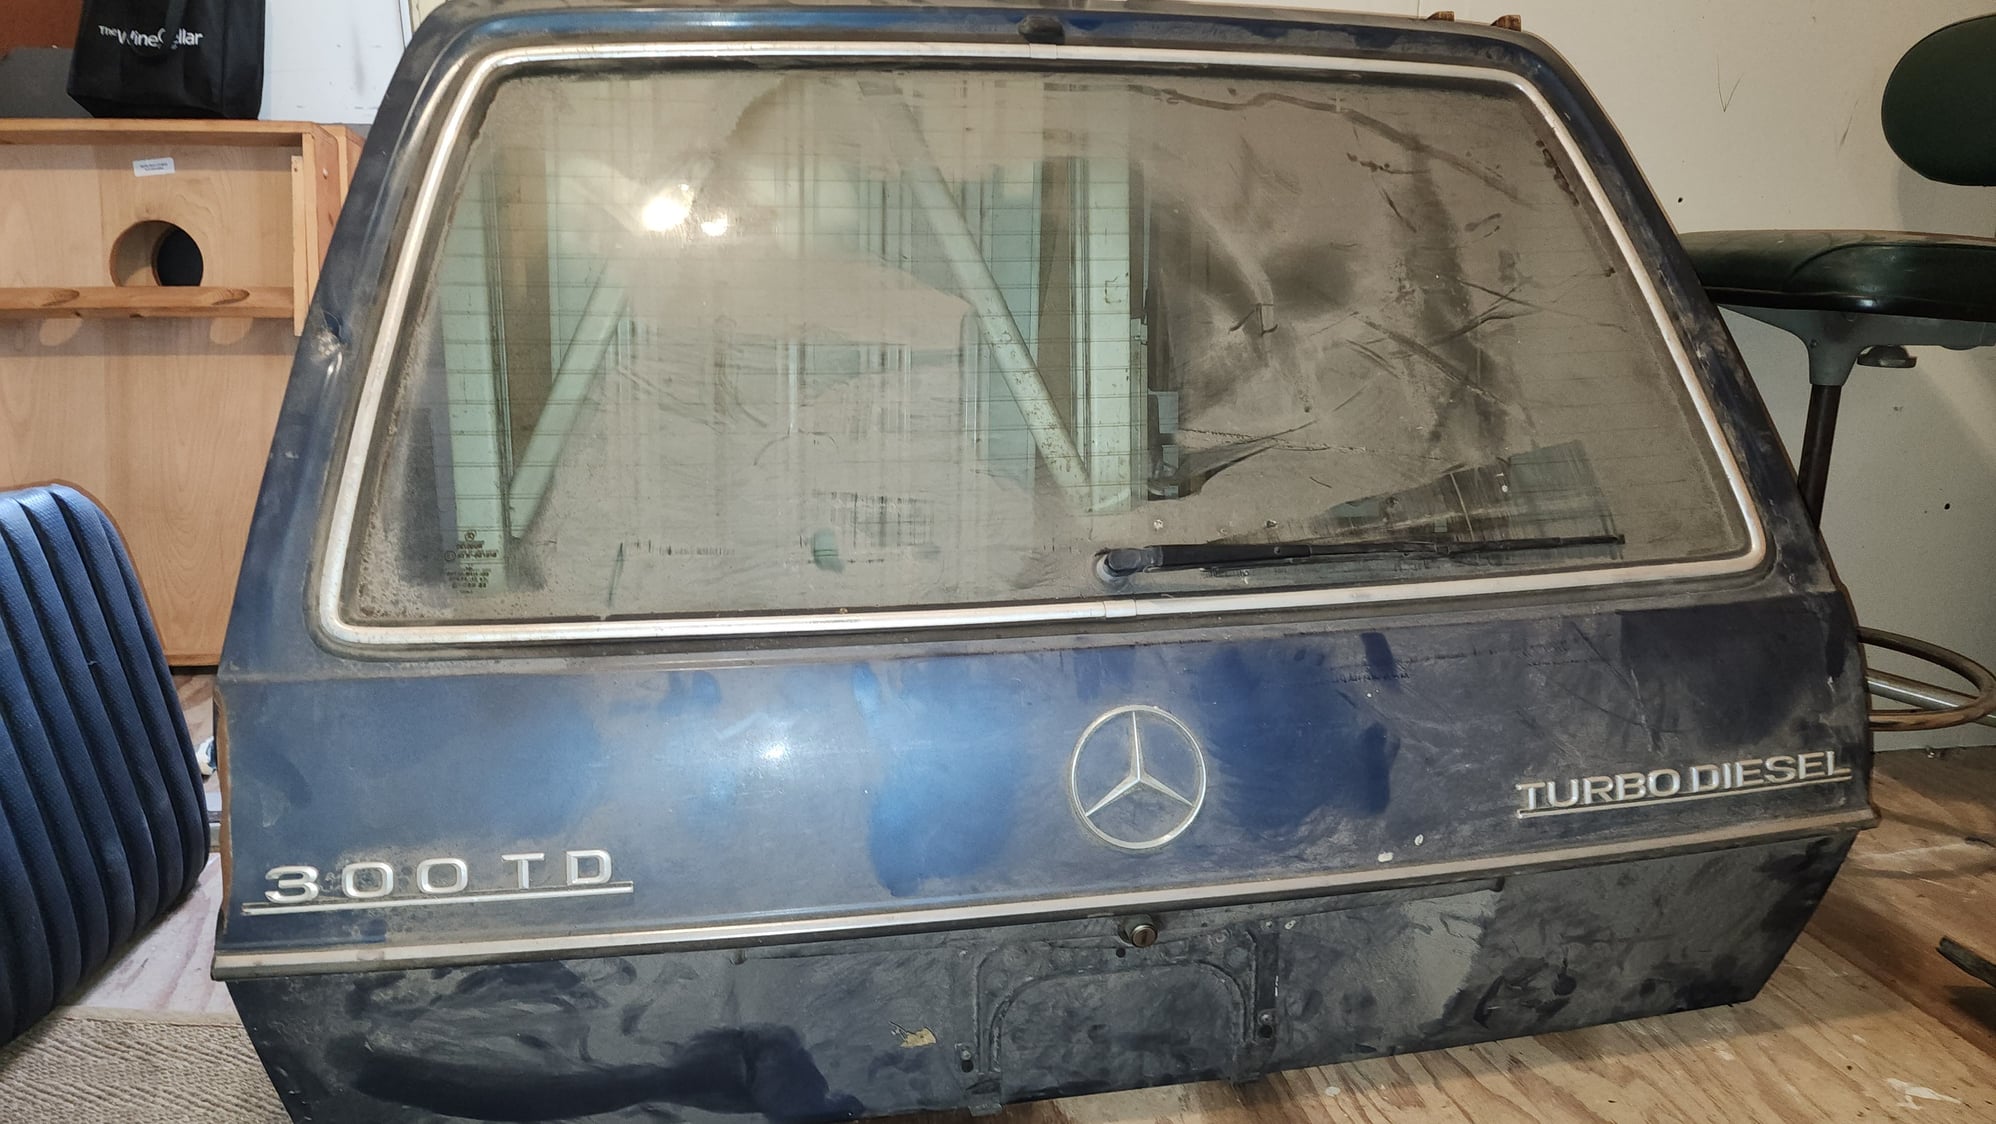 1983 Mercedes-Benz 300TD - Various parts from 1983 300TD - Joliet, IL 60435, United States